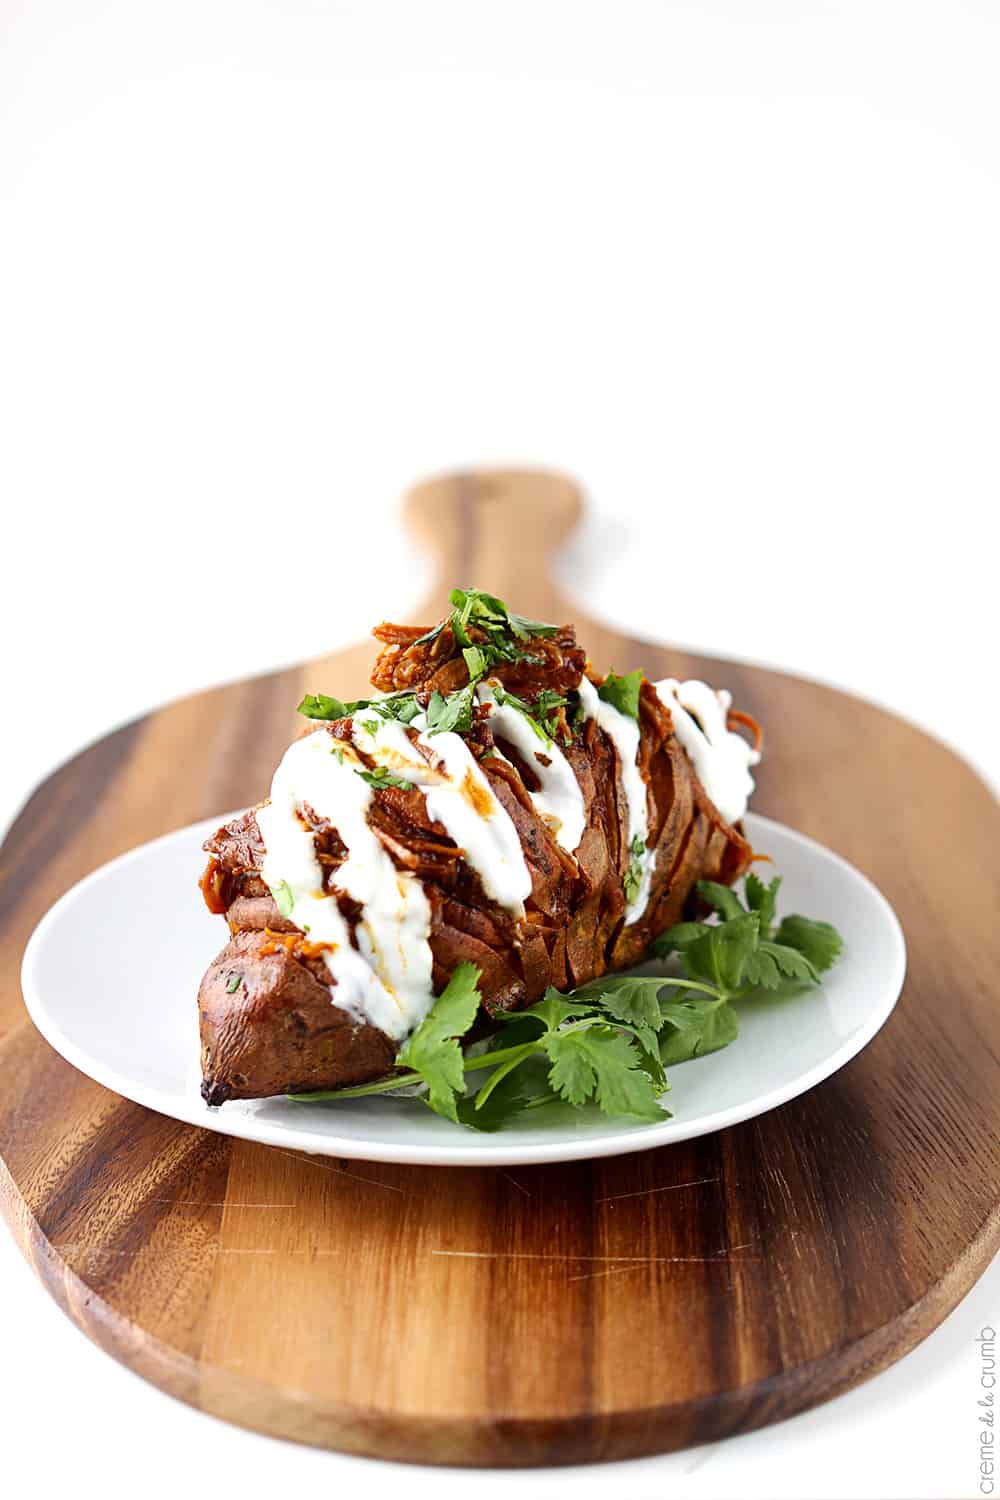 a bbq pulled pork stuffed hasselback sweet potato on a plate on a wooden cutting board.